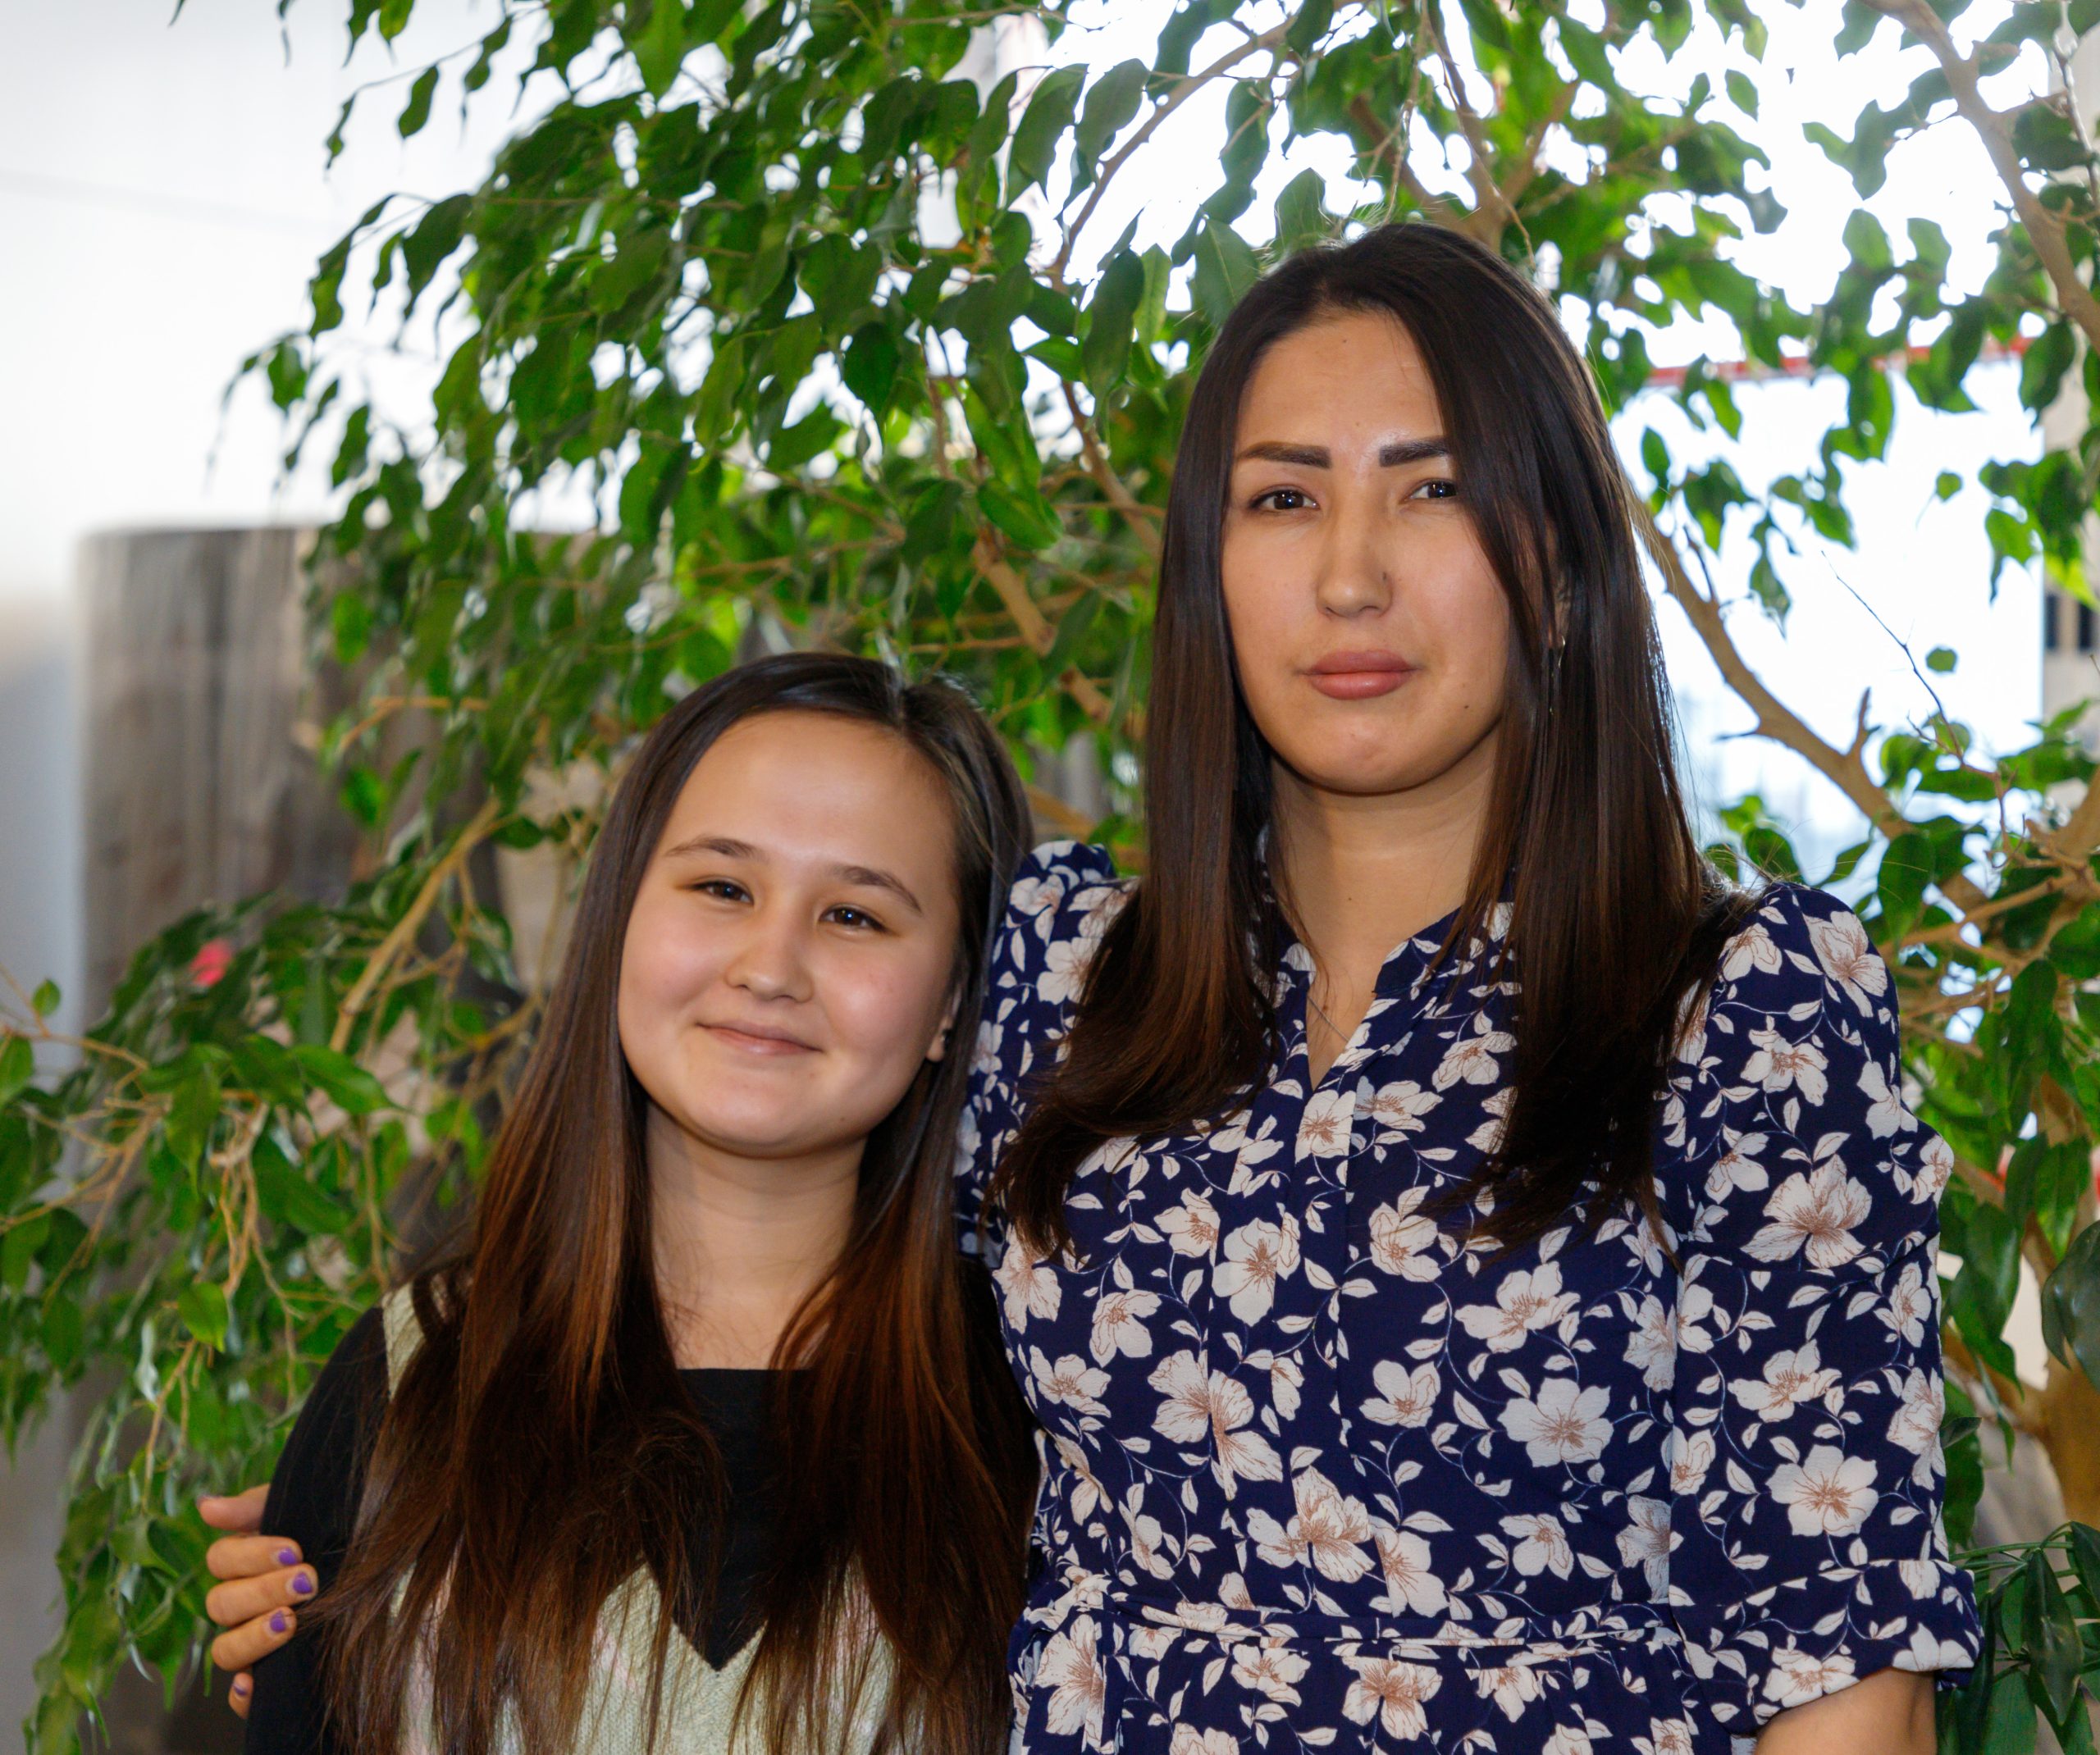 Mohabeesa Roshanian, left, poses for a photo with Fatima Roshanian inside Centre for Newcomers in Calgary